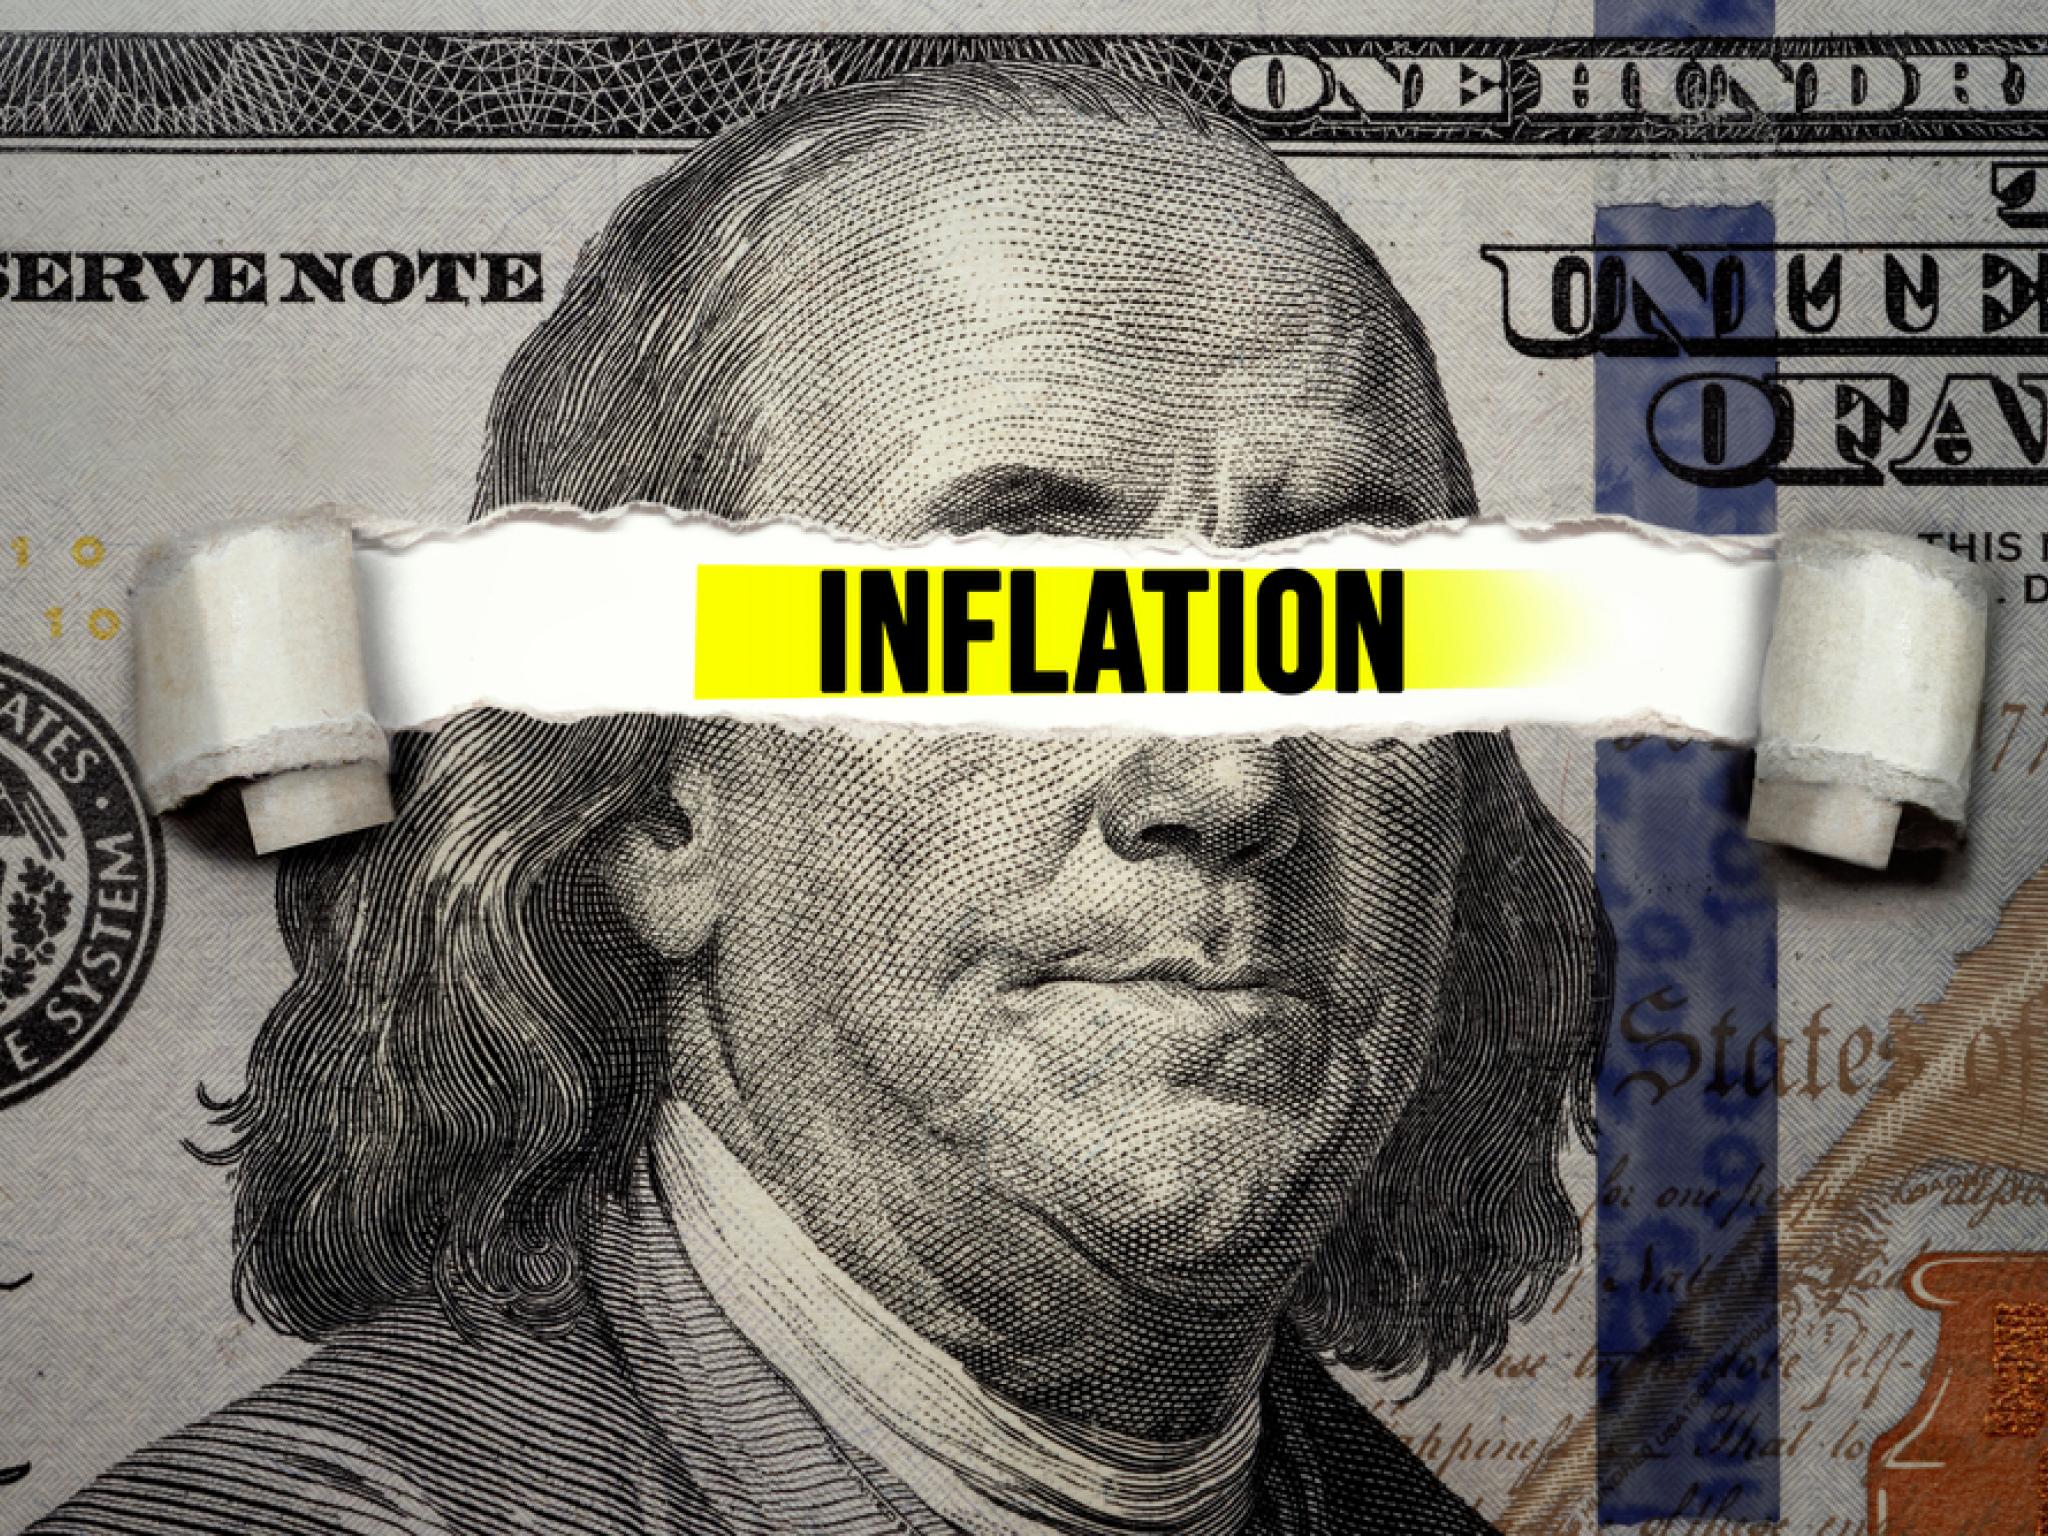  feds-favorite-inflation-data-due-friday-how-could-markets-react-to-surprises 